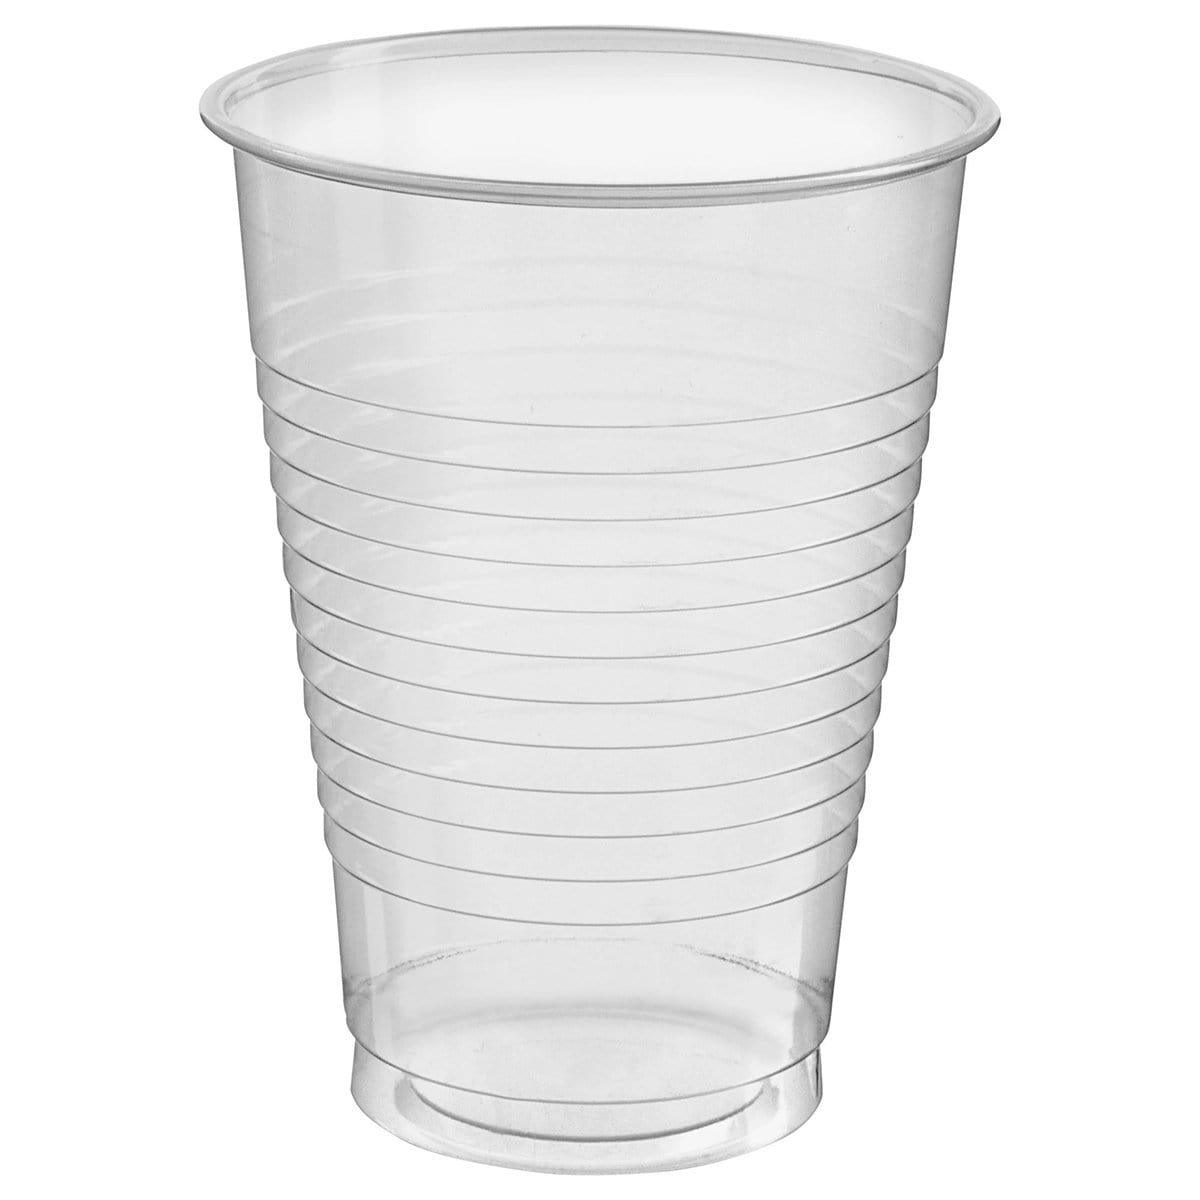 Buy plasticware Clear Plastic Cups, 12 oz., 20 Count sold at Party Expert